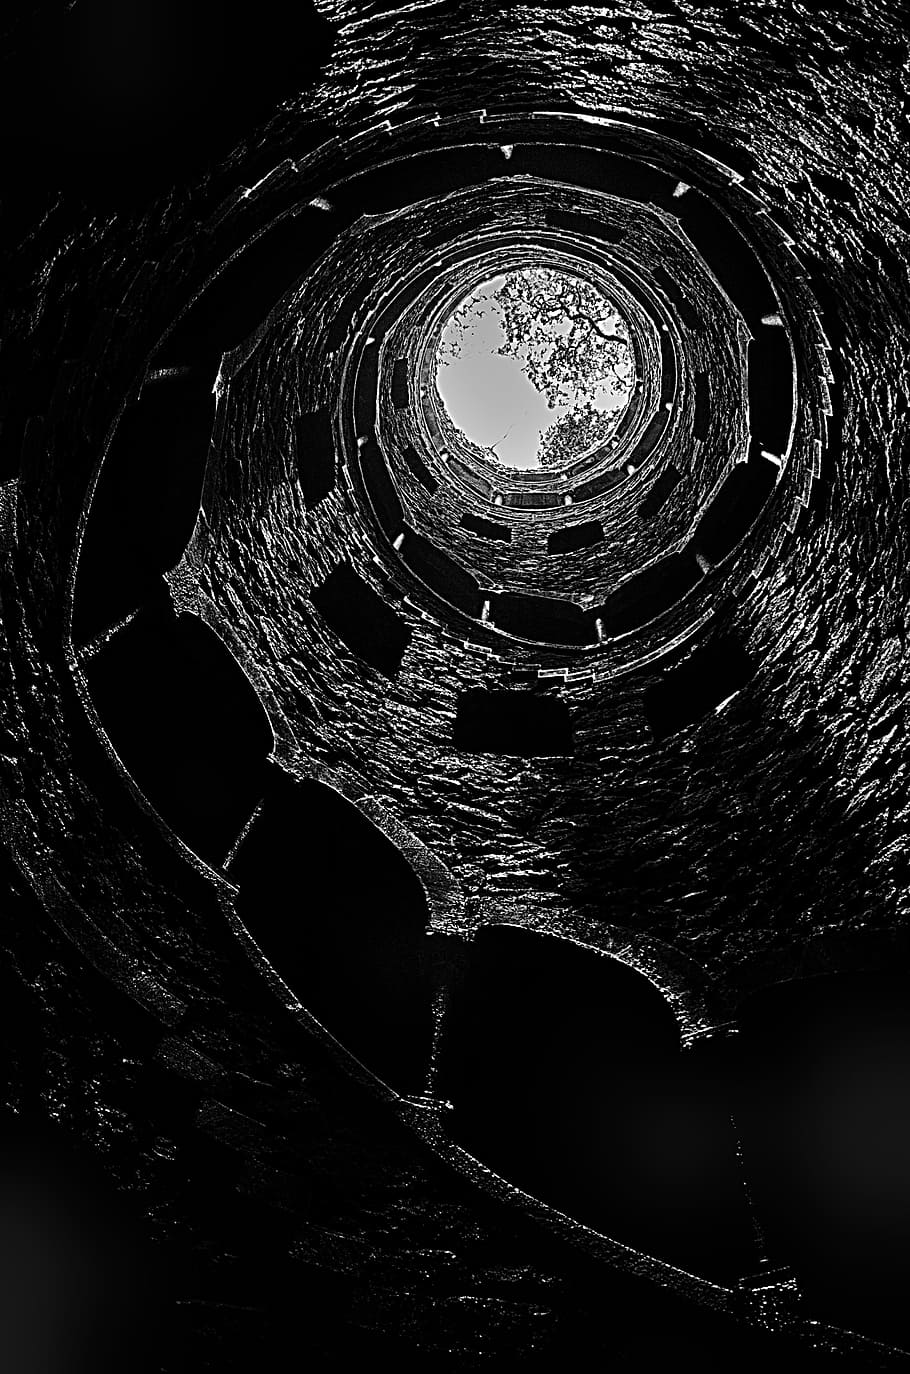 Sintra, Portugal, Well, Initiatory, well initiatory, circle, textured, concentric, nature, water